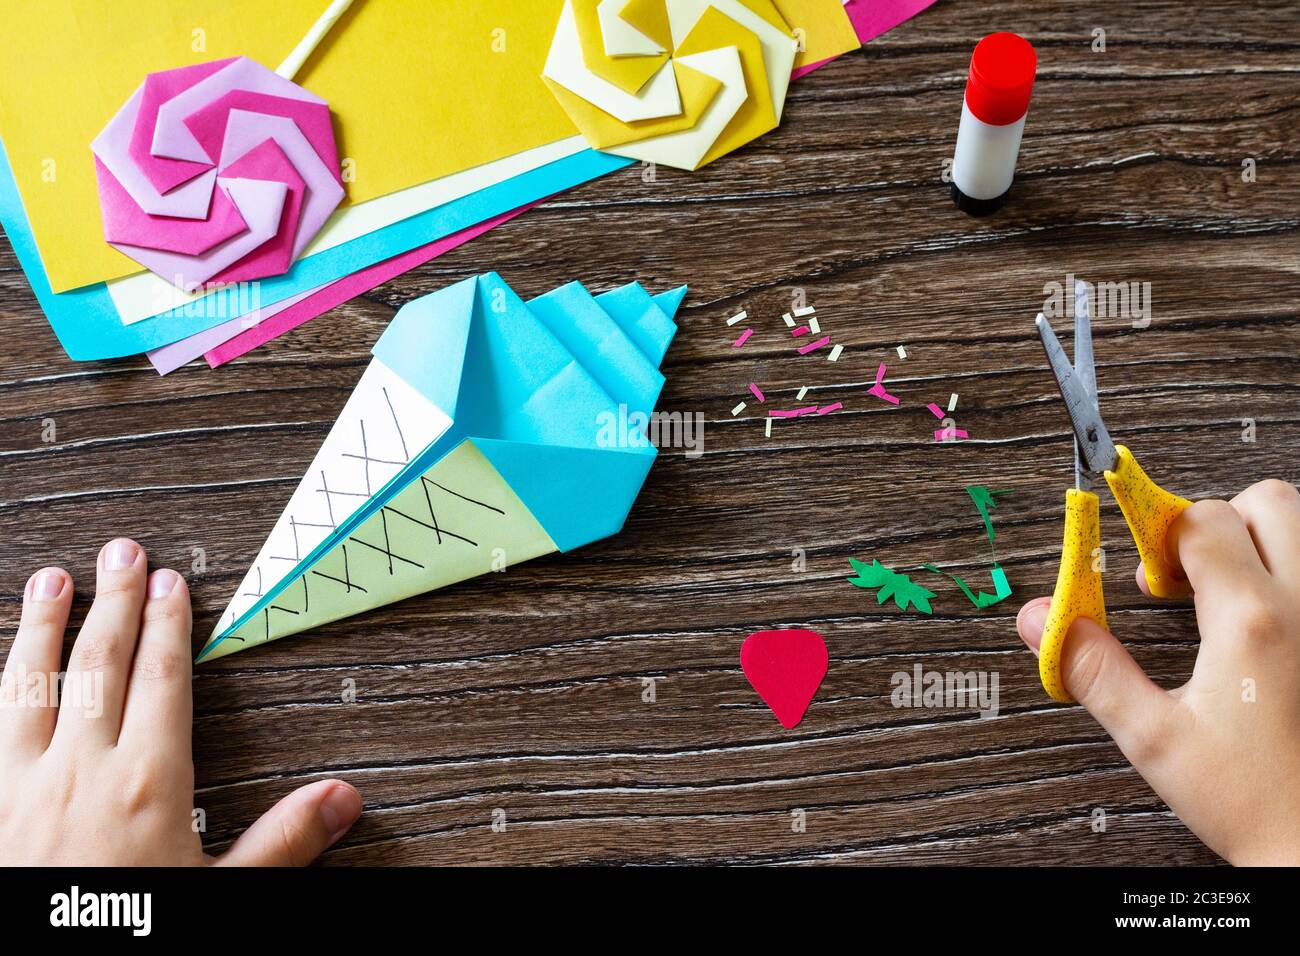 Instruction step 12. Funny toy Origami paper ice cream on a wooden table.  Children's art project, handmade, crafts for children Stock Photo - Alamy